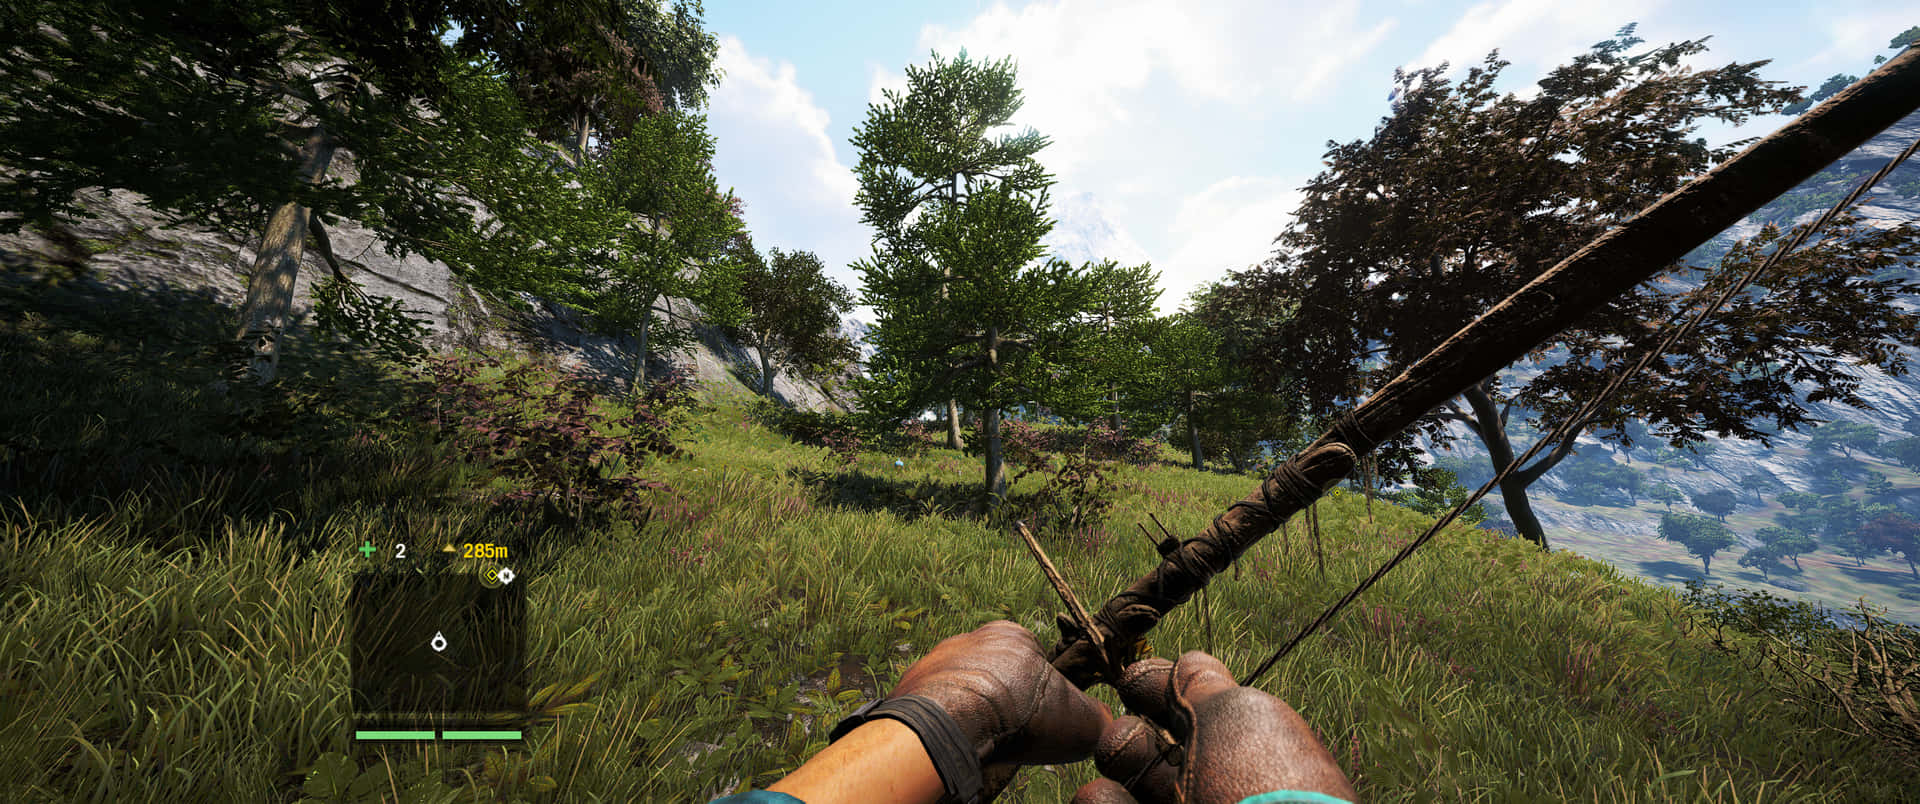 A Screenshot Of A Game With A Bow And Arrow